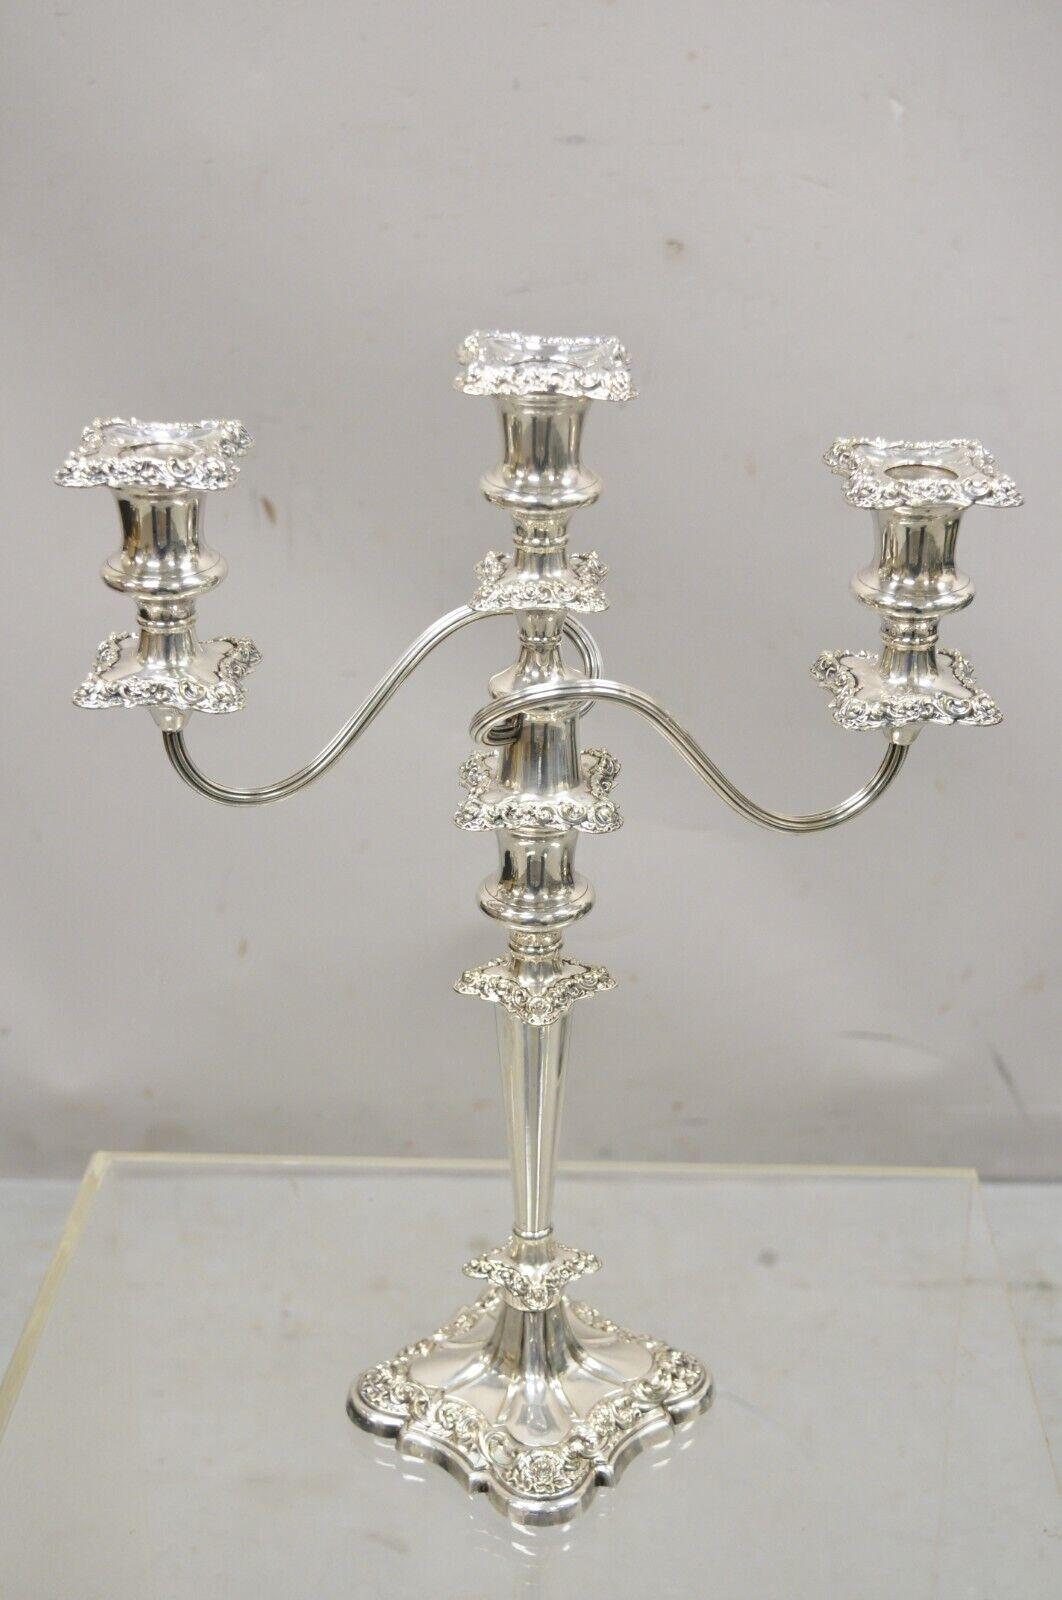 Antique Gorham Floral Repousse Twin Arm Silver Plated Candlestick Candelabra For Sale 2